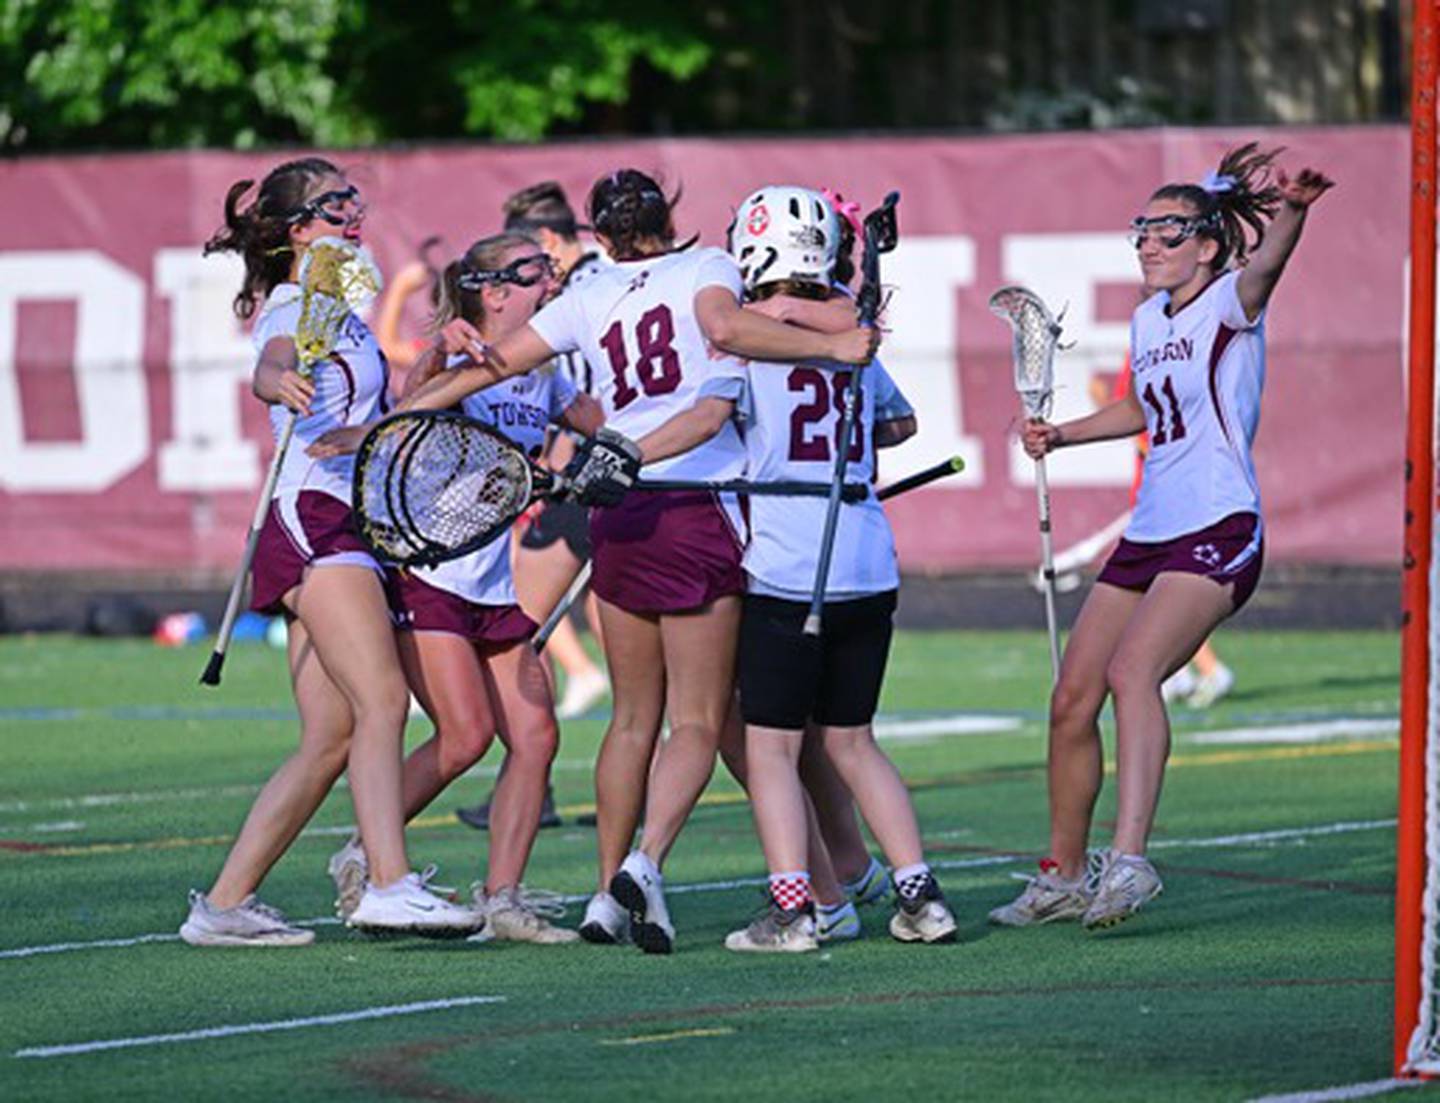 Towson's girls lacrosse team celebrate after the final buzzer in Monday's Baltimore County championship game. The 11th-ranked Generals claimed their first crown since 2009 with a 15-4 victory over Dulaney.